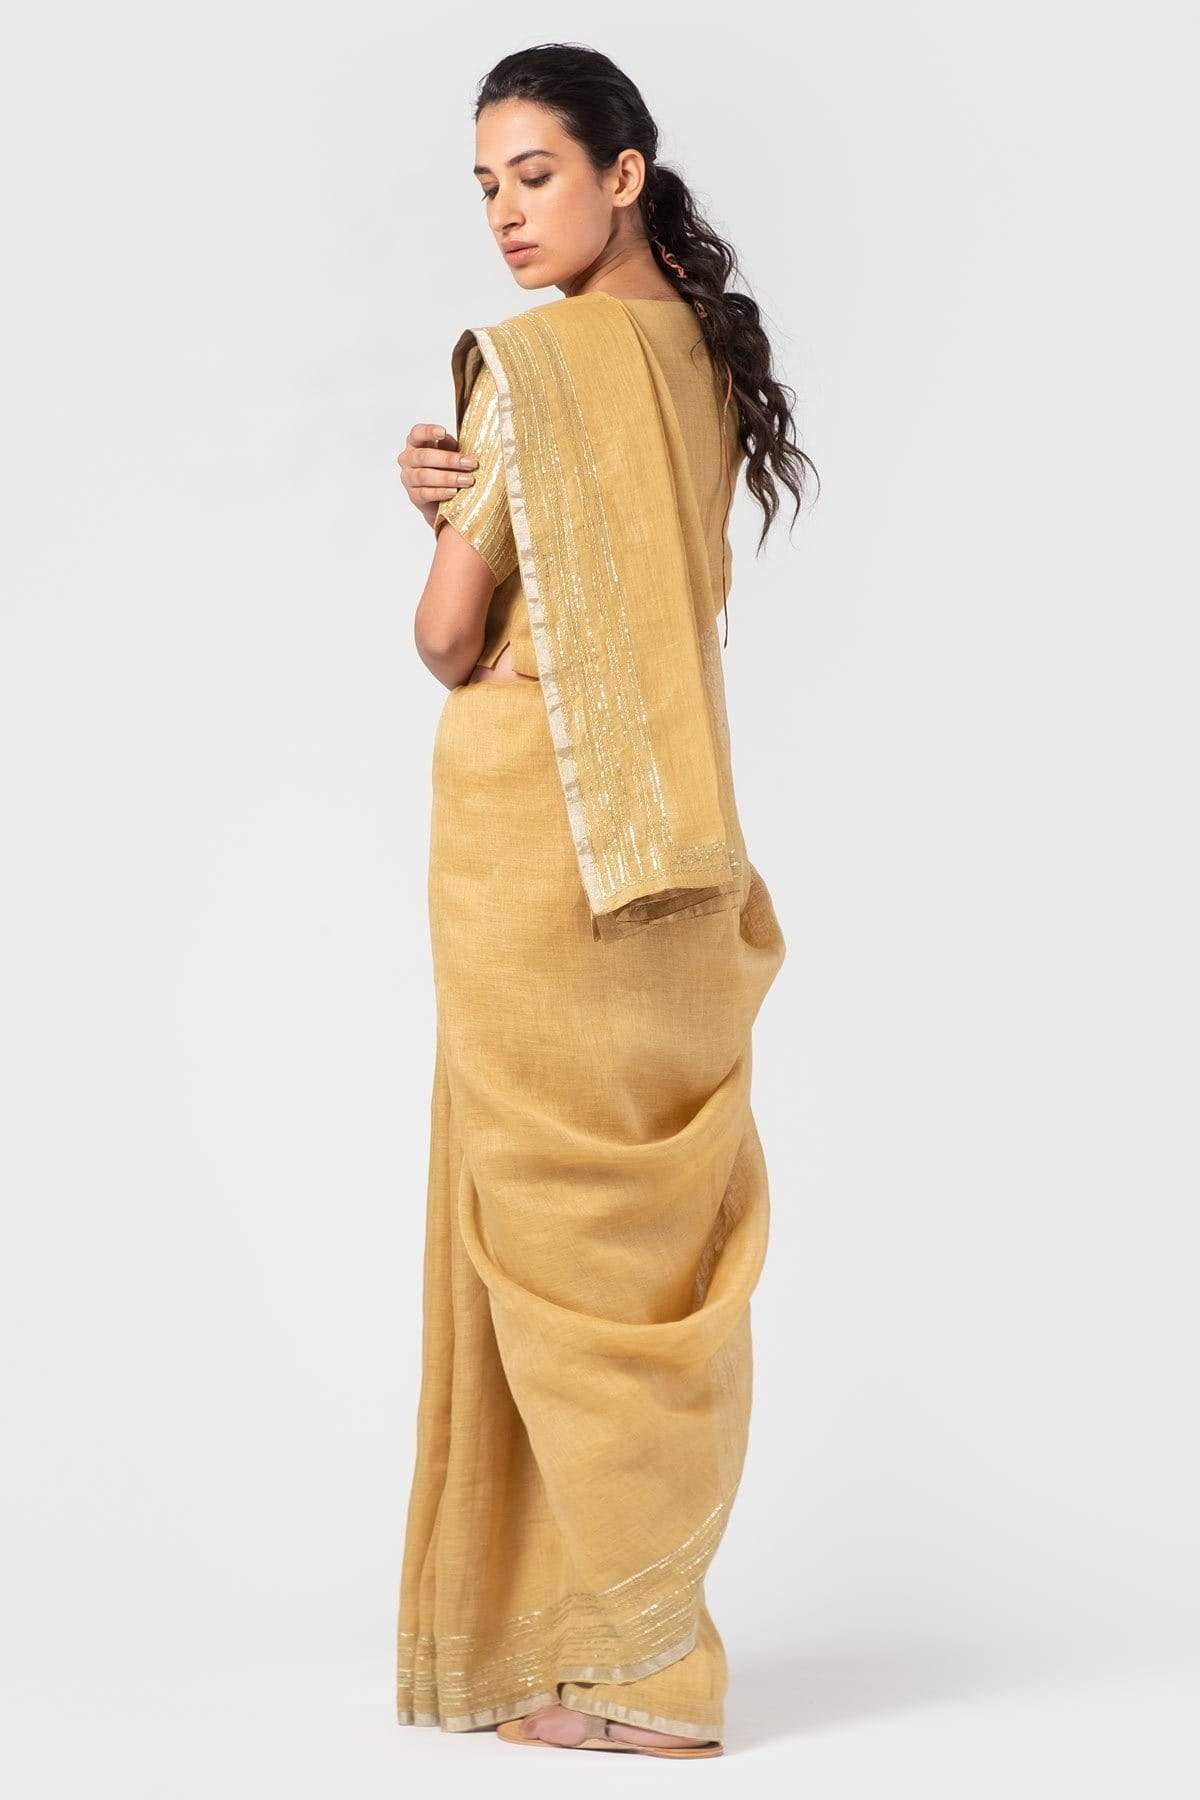 Evening Linen Saree Indian Clothing in Denver, CO, Aurora, CO, Boulder, CO, Fort Collins, CO, Colorado Springs, CO, Parker, CO, Highlands Ranch, CO, Cherry Creek, CO, Centennial, CO, and Longmont, CO. NATIONWIDE SHIPPING USA- India Fashion X